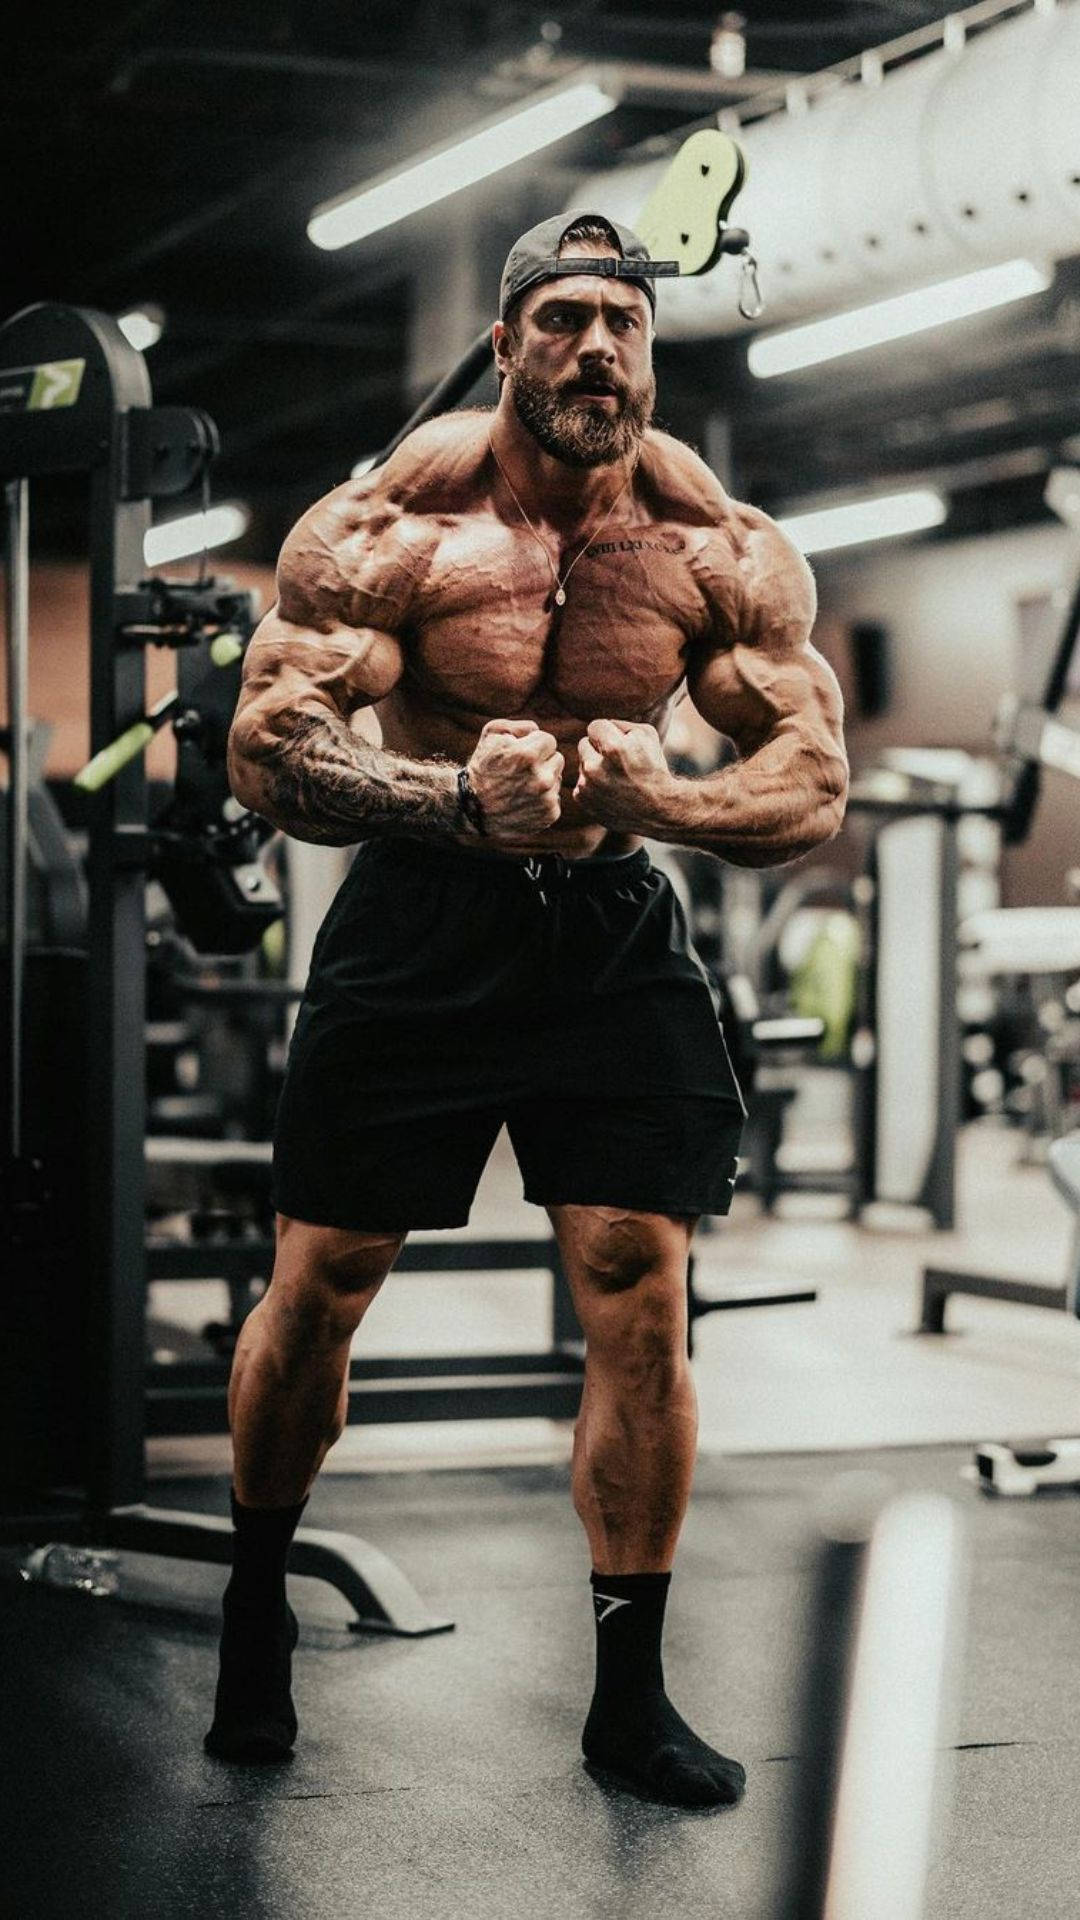 Chris Bumstead Most Muscular Pose Wallpaper